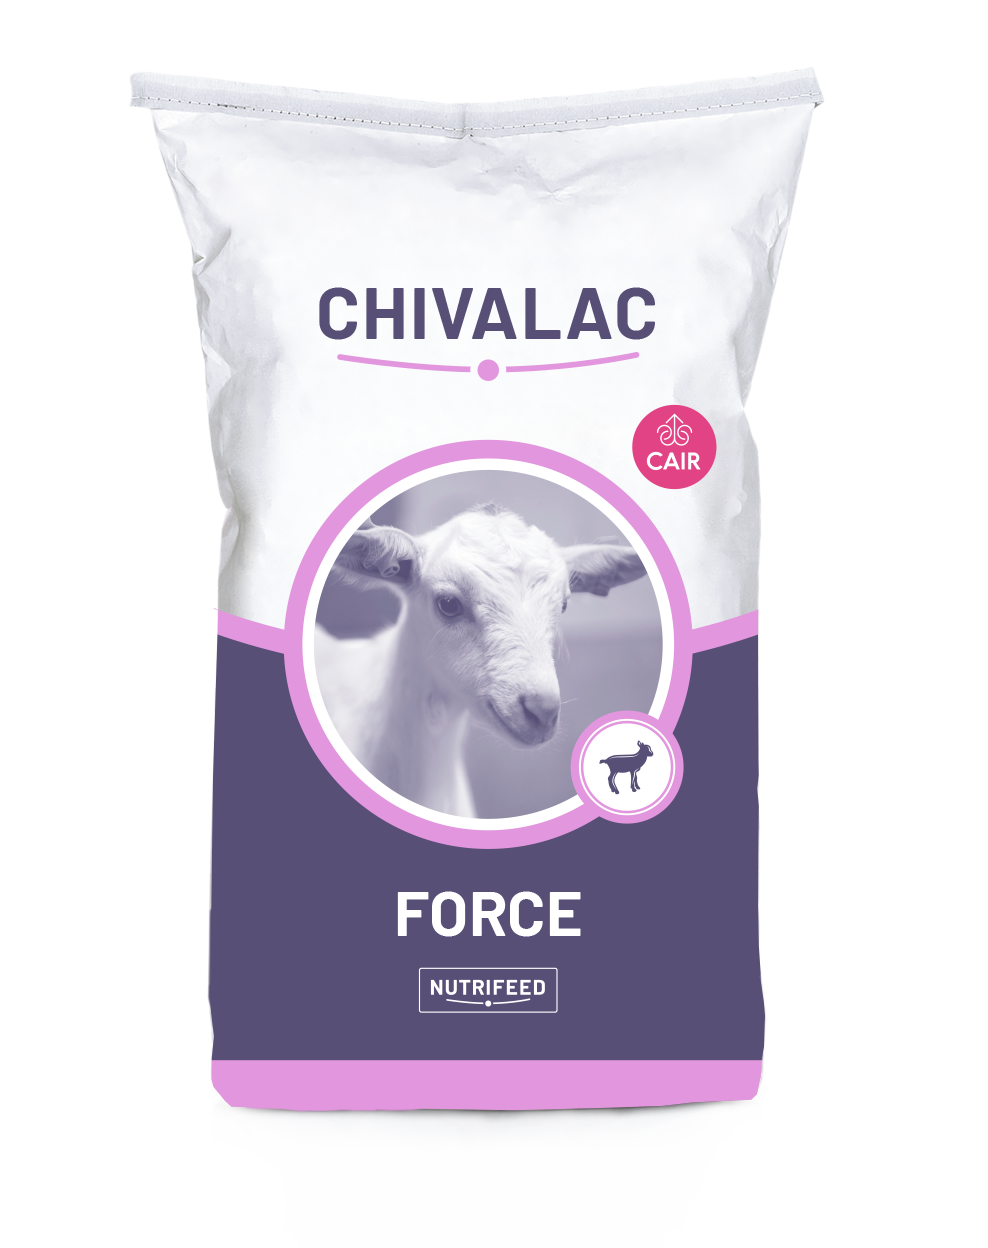 Chivalac Force CAIR